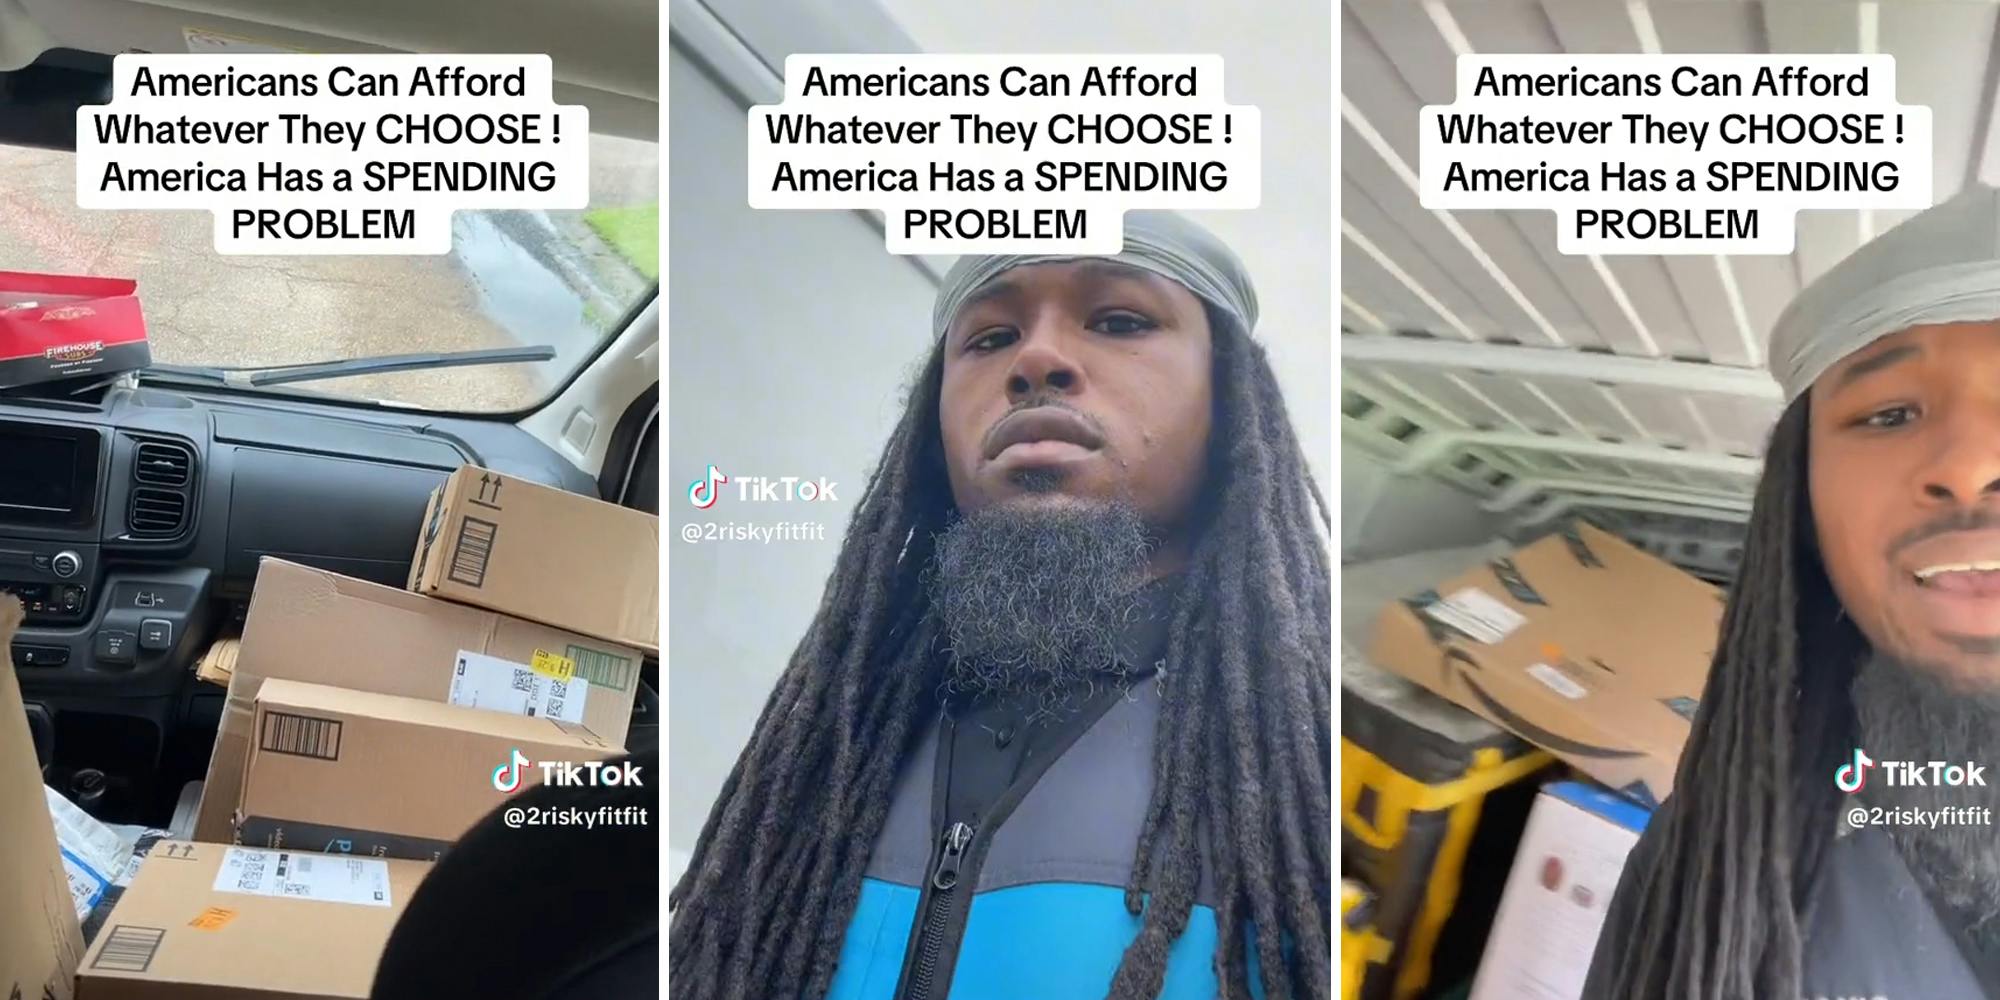 packages in passenger seat of delivery van (l) Amazon driver outside van (c) Amazon driver inside van with packages (r) all with caption "Americans can afford whatever they CHOOSE! America has a SPENDING PROBLEM"